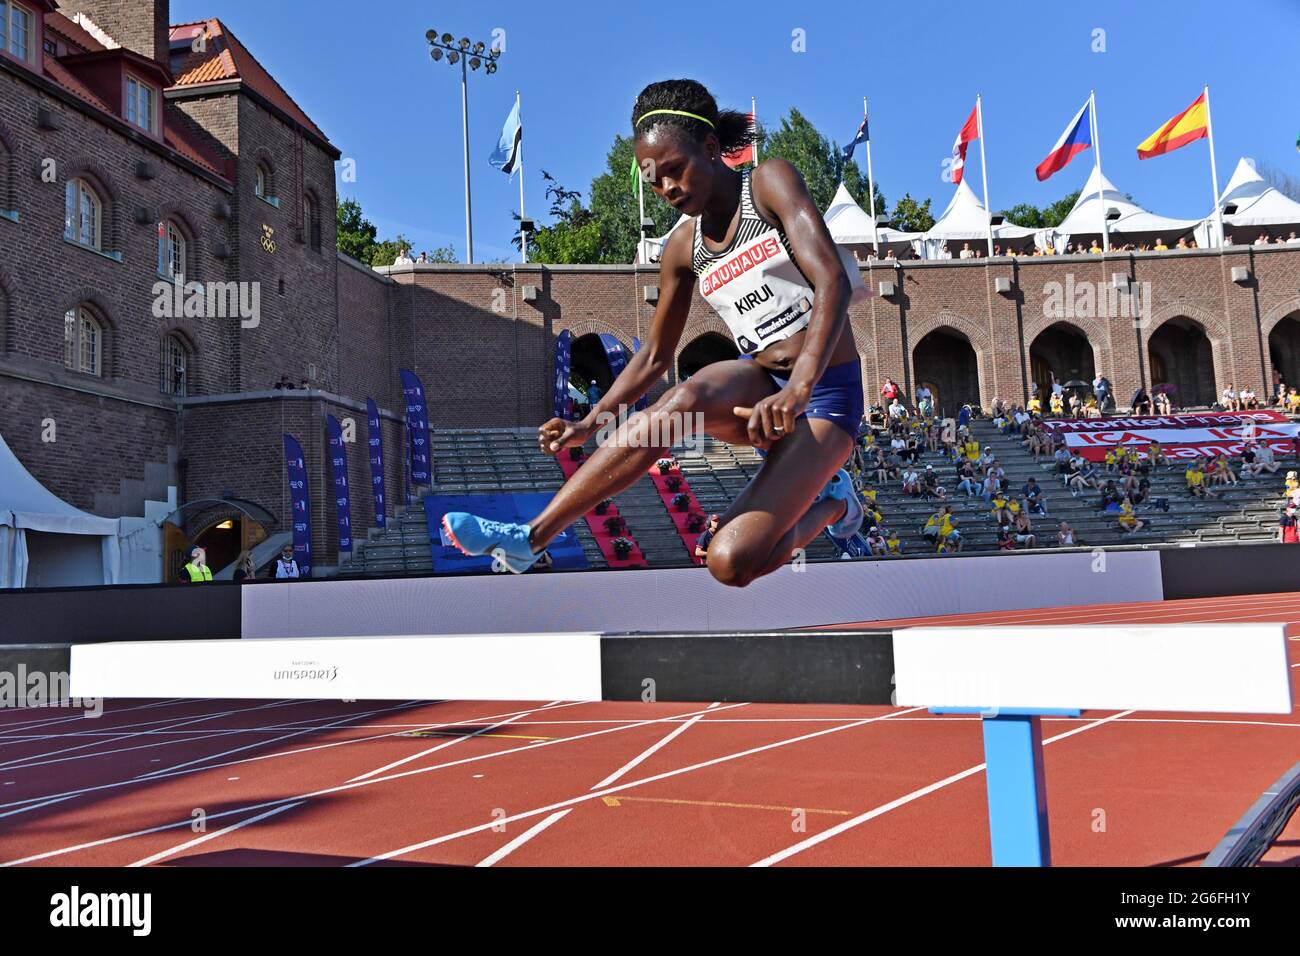 Purity Kirui (KEN) places fourth in the women's steeplechase in 9:16.91 at the Bauhaus Galan at Olympiastadion, Sunday, July 4, 2021, in Stockholm, Sw Stock Photo